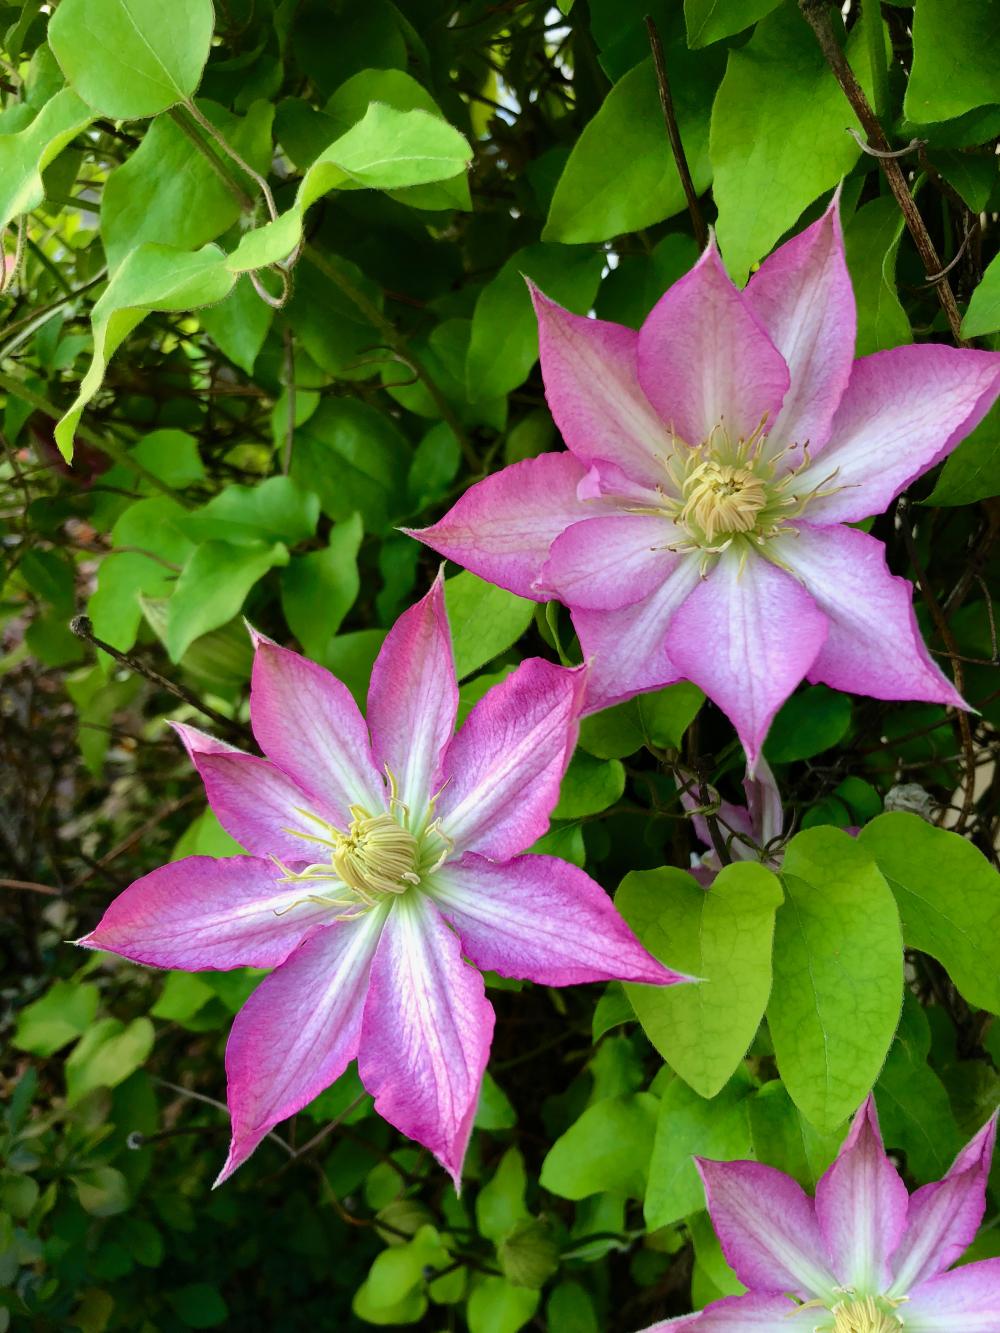 Saturated colorful clematis